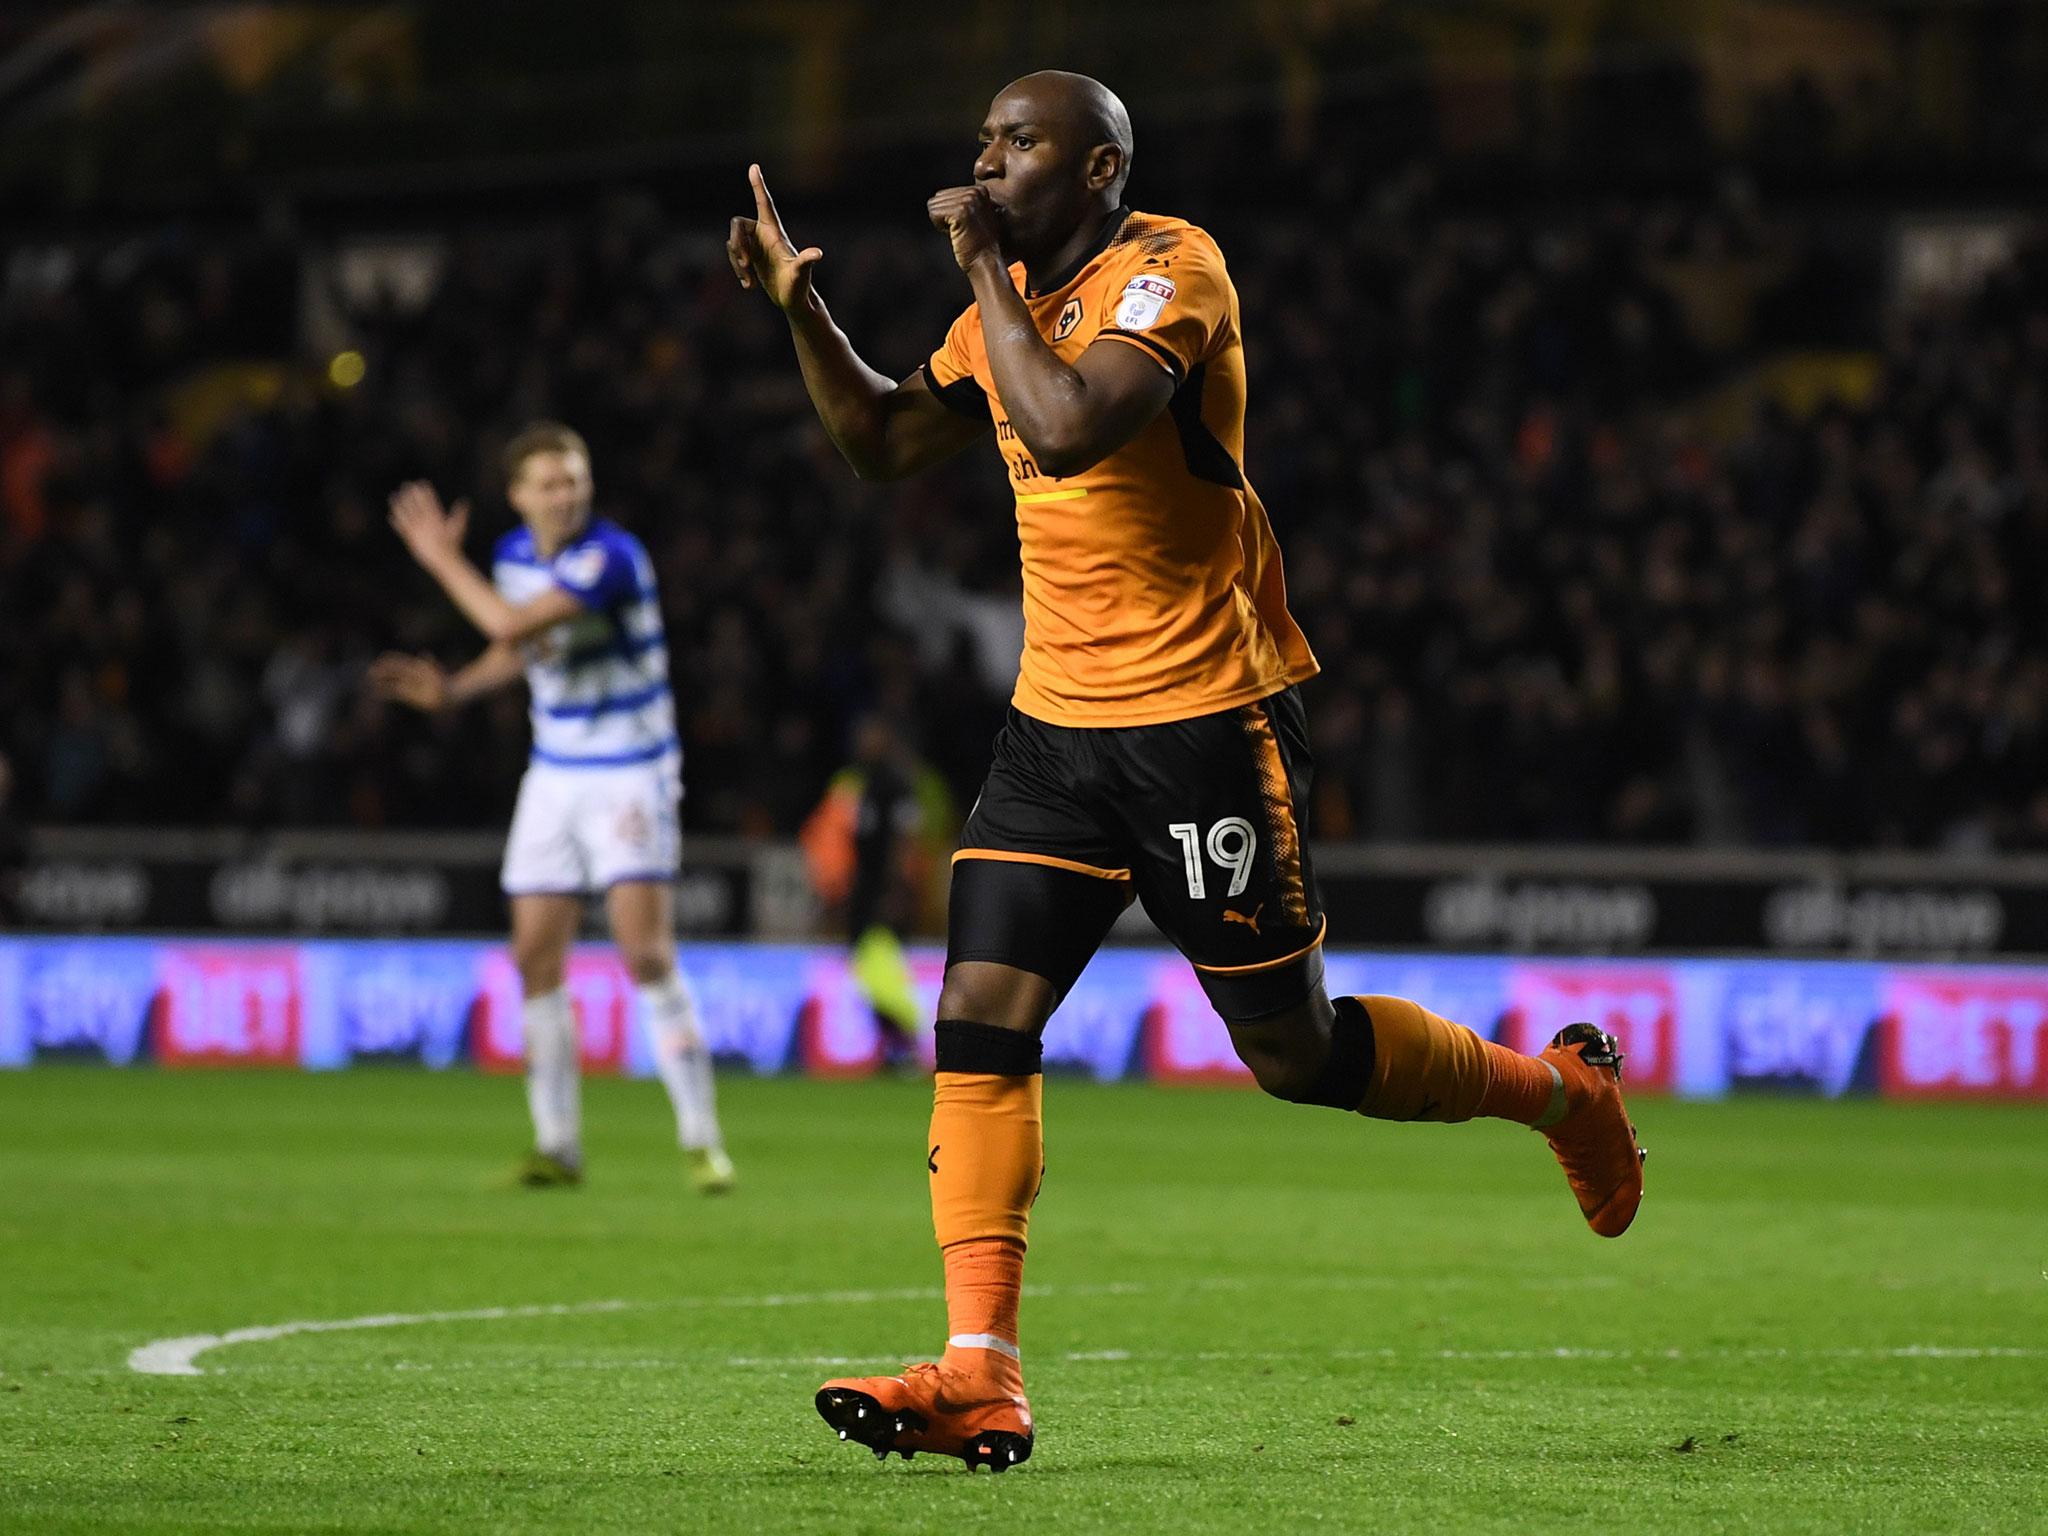 Afobe only rejoined Wolves on Friday